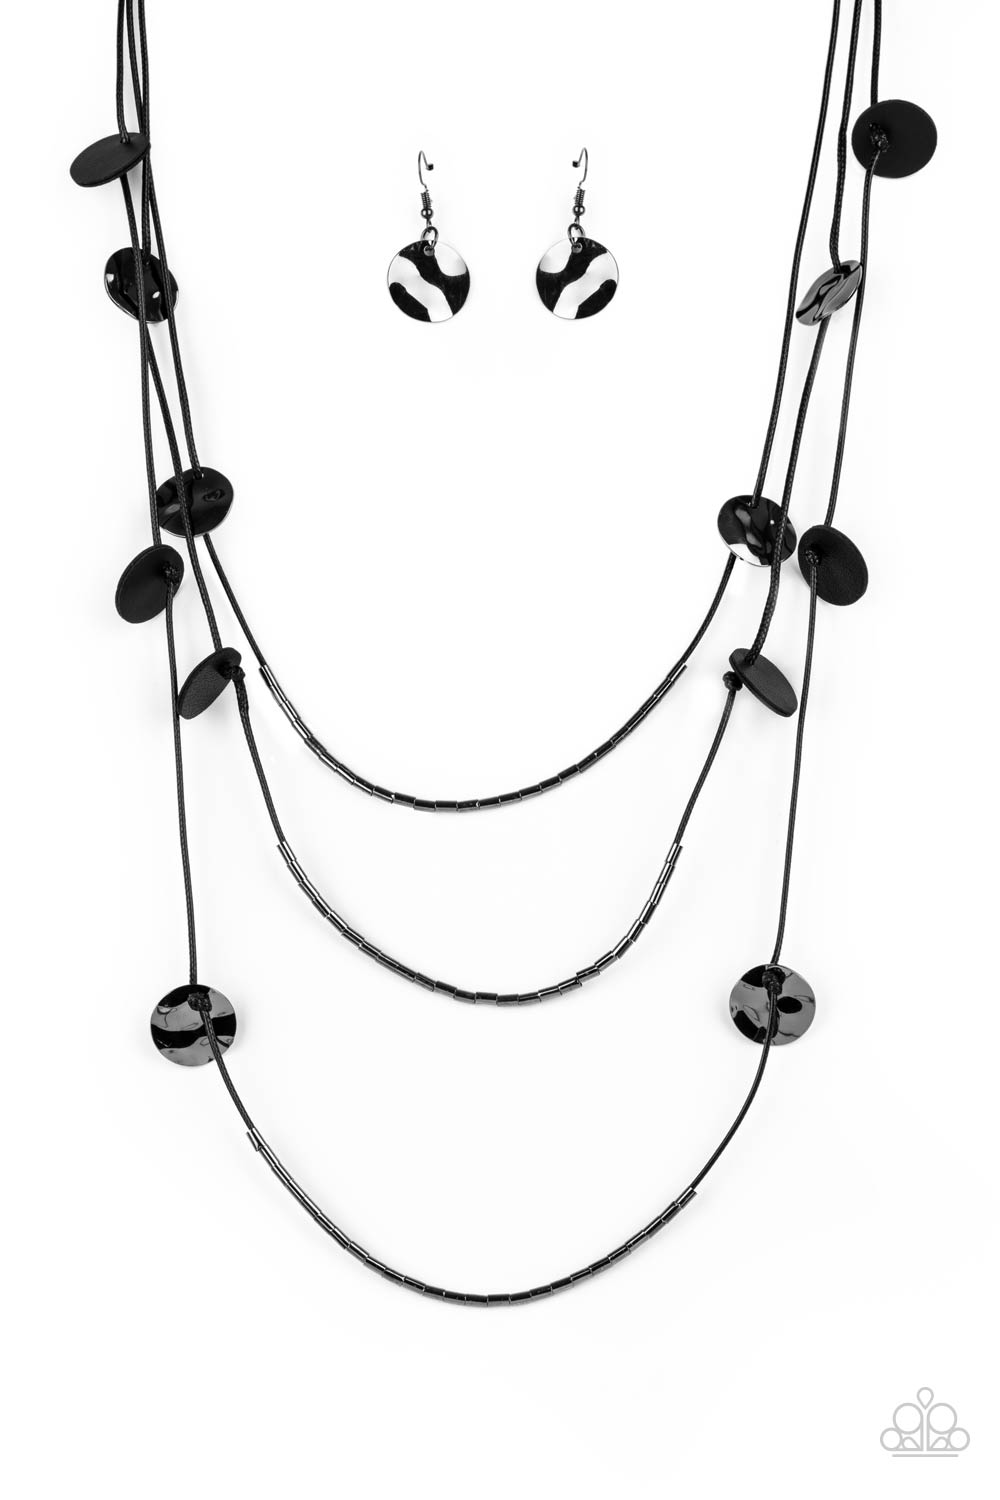 Alluring Luxe - Black Long Leather Necklaces shining wavy gunmetal discs and black leather discs adorn a trio of lengthened subtly shimmering black cords. Rows of dainty gunmetal cylinders are threaded along the bottom of each cord adding luxurious allure to the piece. Features an adjustable clasp closure.